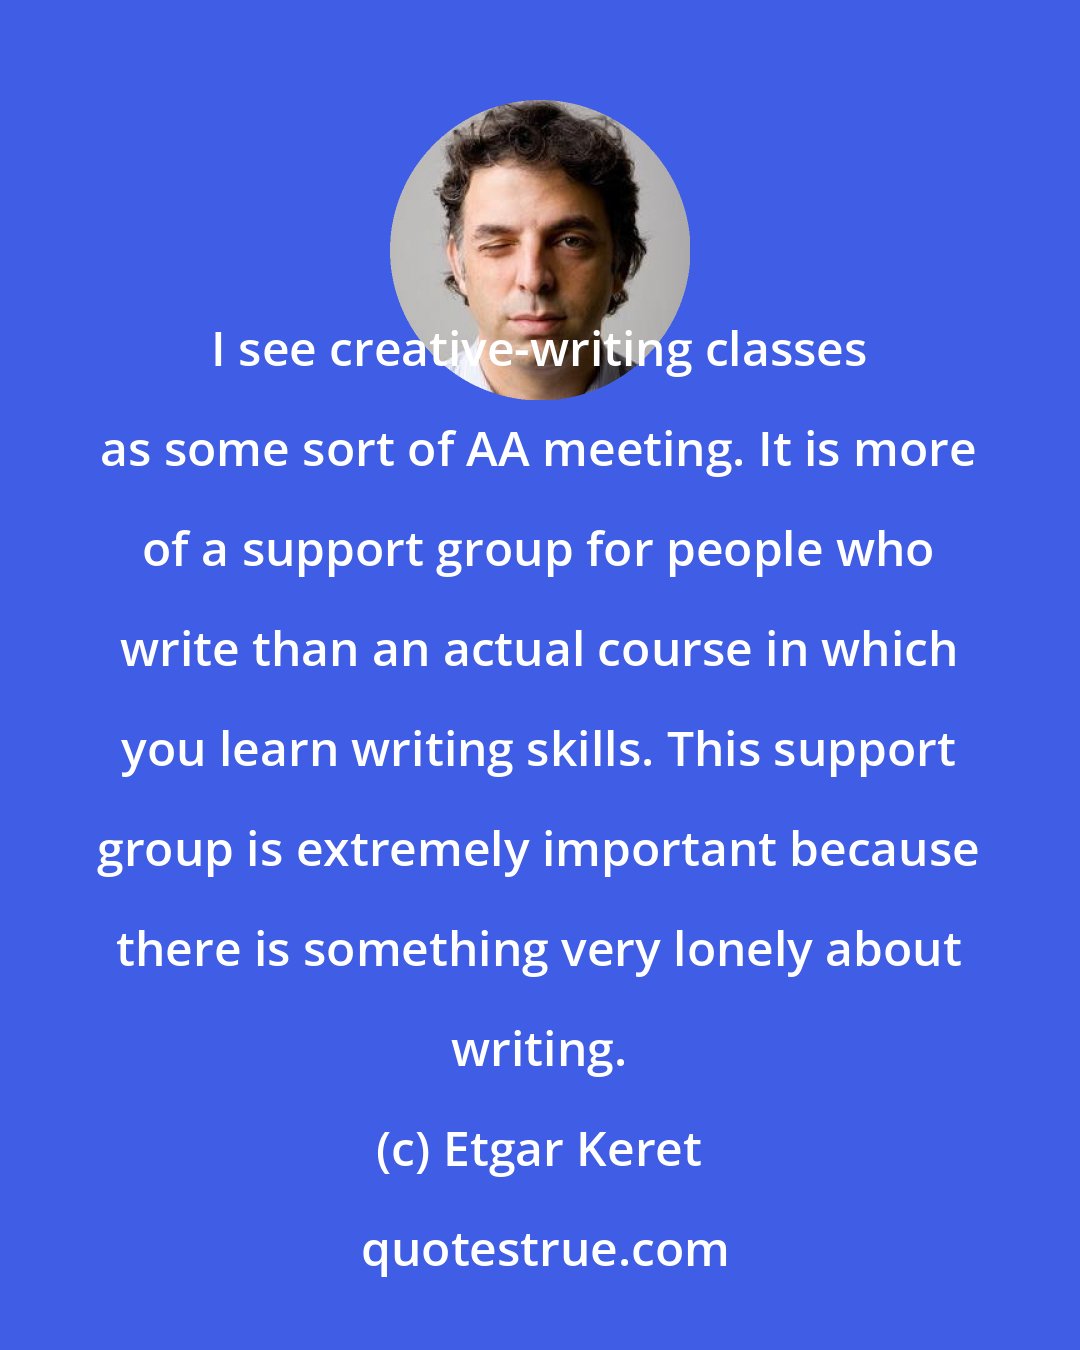 Etgar Keret: I see creative-writing classes as some sort of AA meeting. It is more of a support group for people who write than an actual course in which you learn writing skills. This support group is extremely important because there is something very lonely about writing.